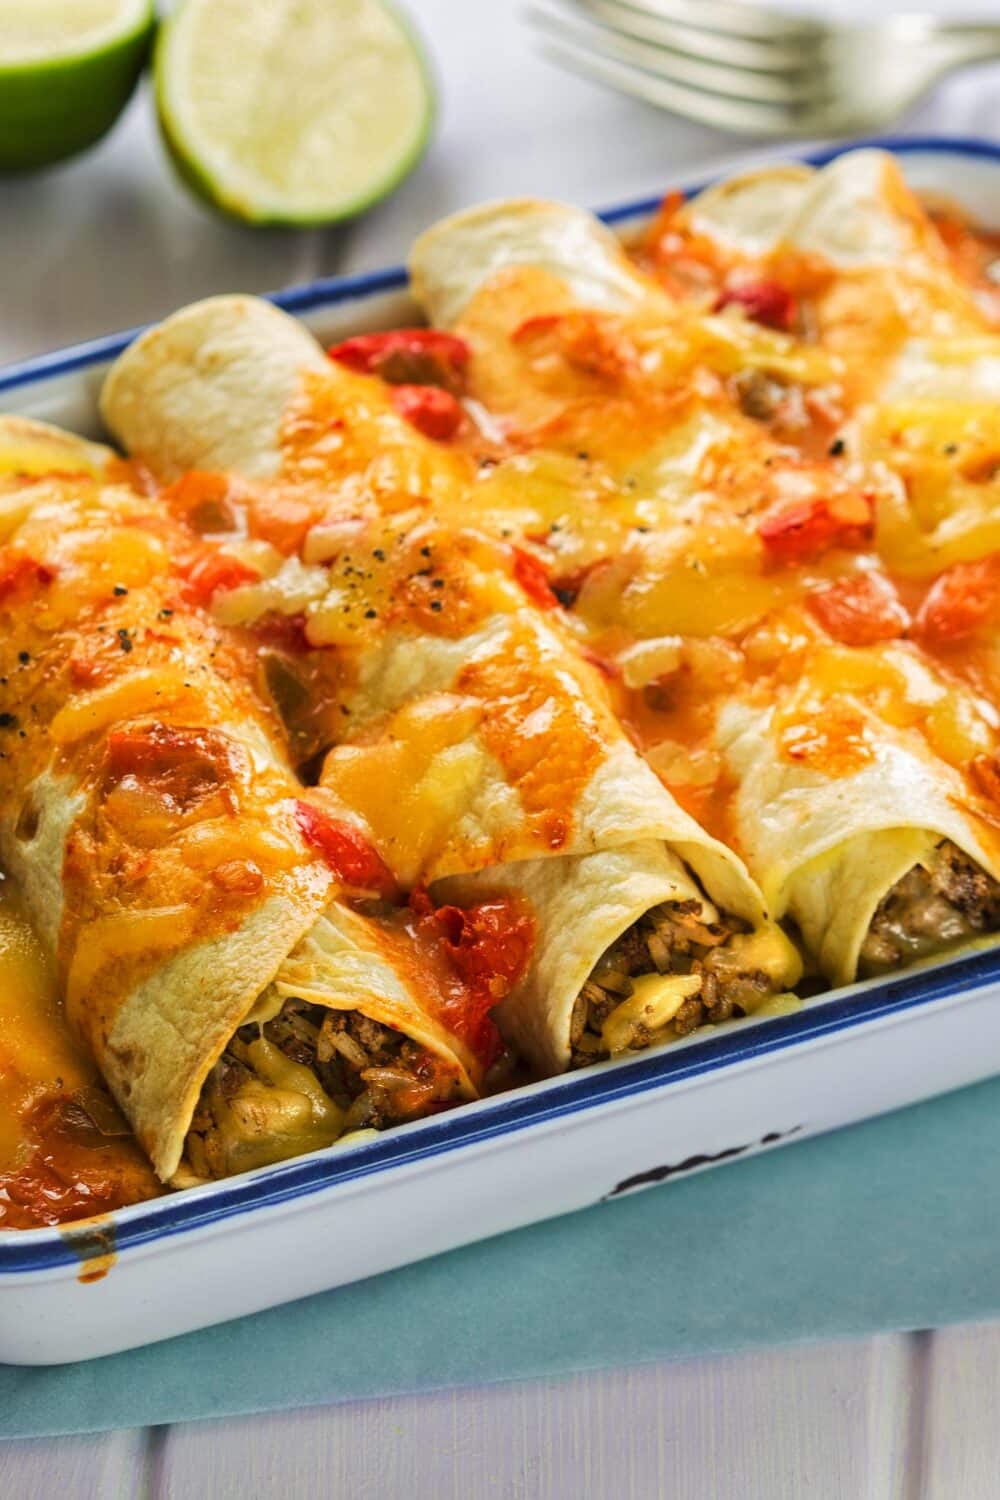 Savory beef enchiladas wrapped in low-carb tortillas, showcasing a delectable fusion of flavors. The tender beef filling is seasoned to perfection and encased in these specialized wraps. Topped with a rich, zesty sauce and a sprinkle of melted cheese, these enchiladas offer all the traditional taste and comfort, while remaining mindful of a low-carb approach.